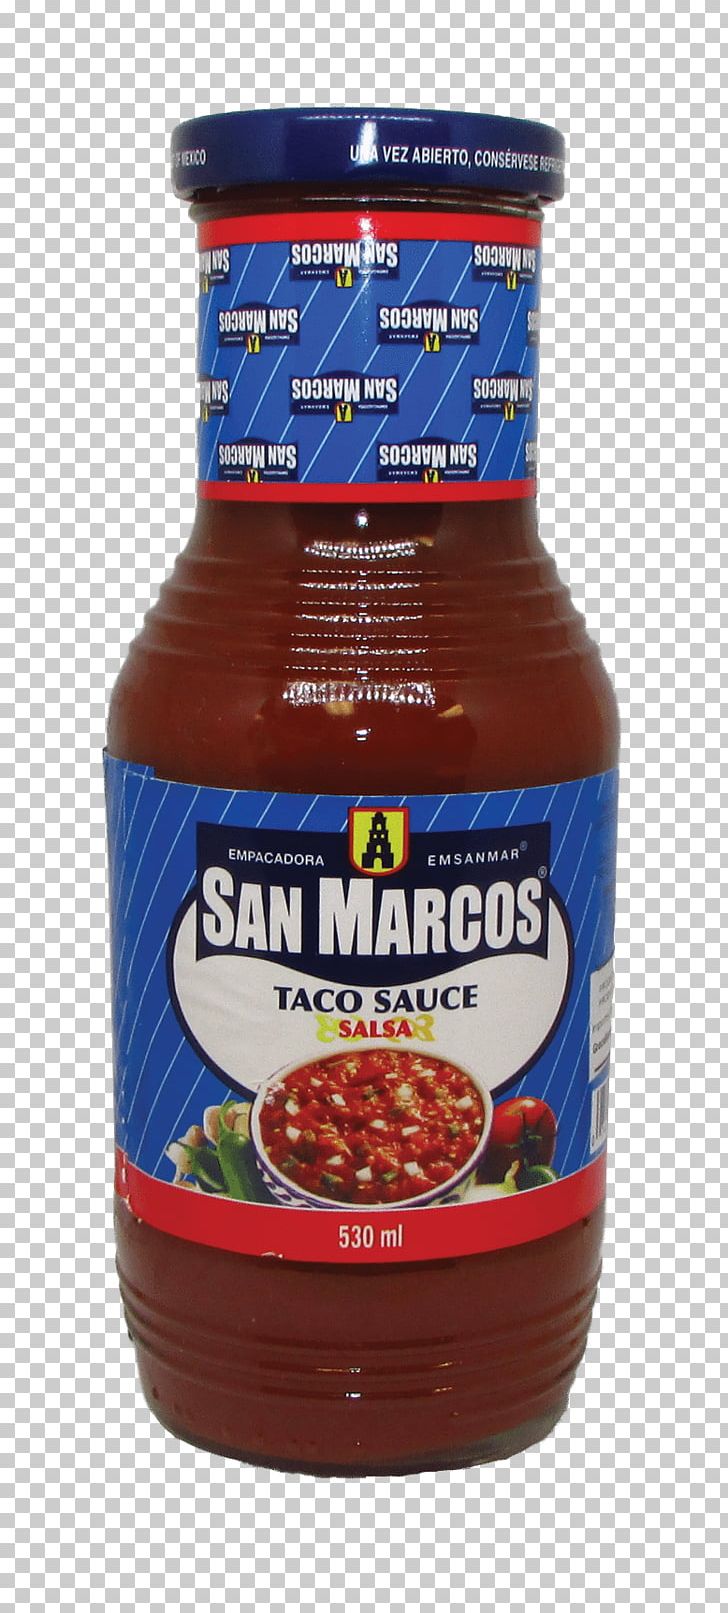 Salsa Mexican Cuisine Taco San Marcos Sweet Chili Sauce PNG, Clipart, Adobo, Canning, Chili Pepper, Chipotle, Condiment Free PNG Download